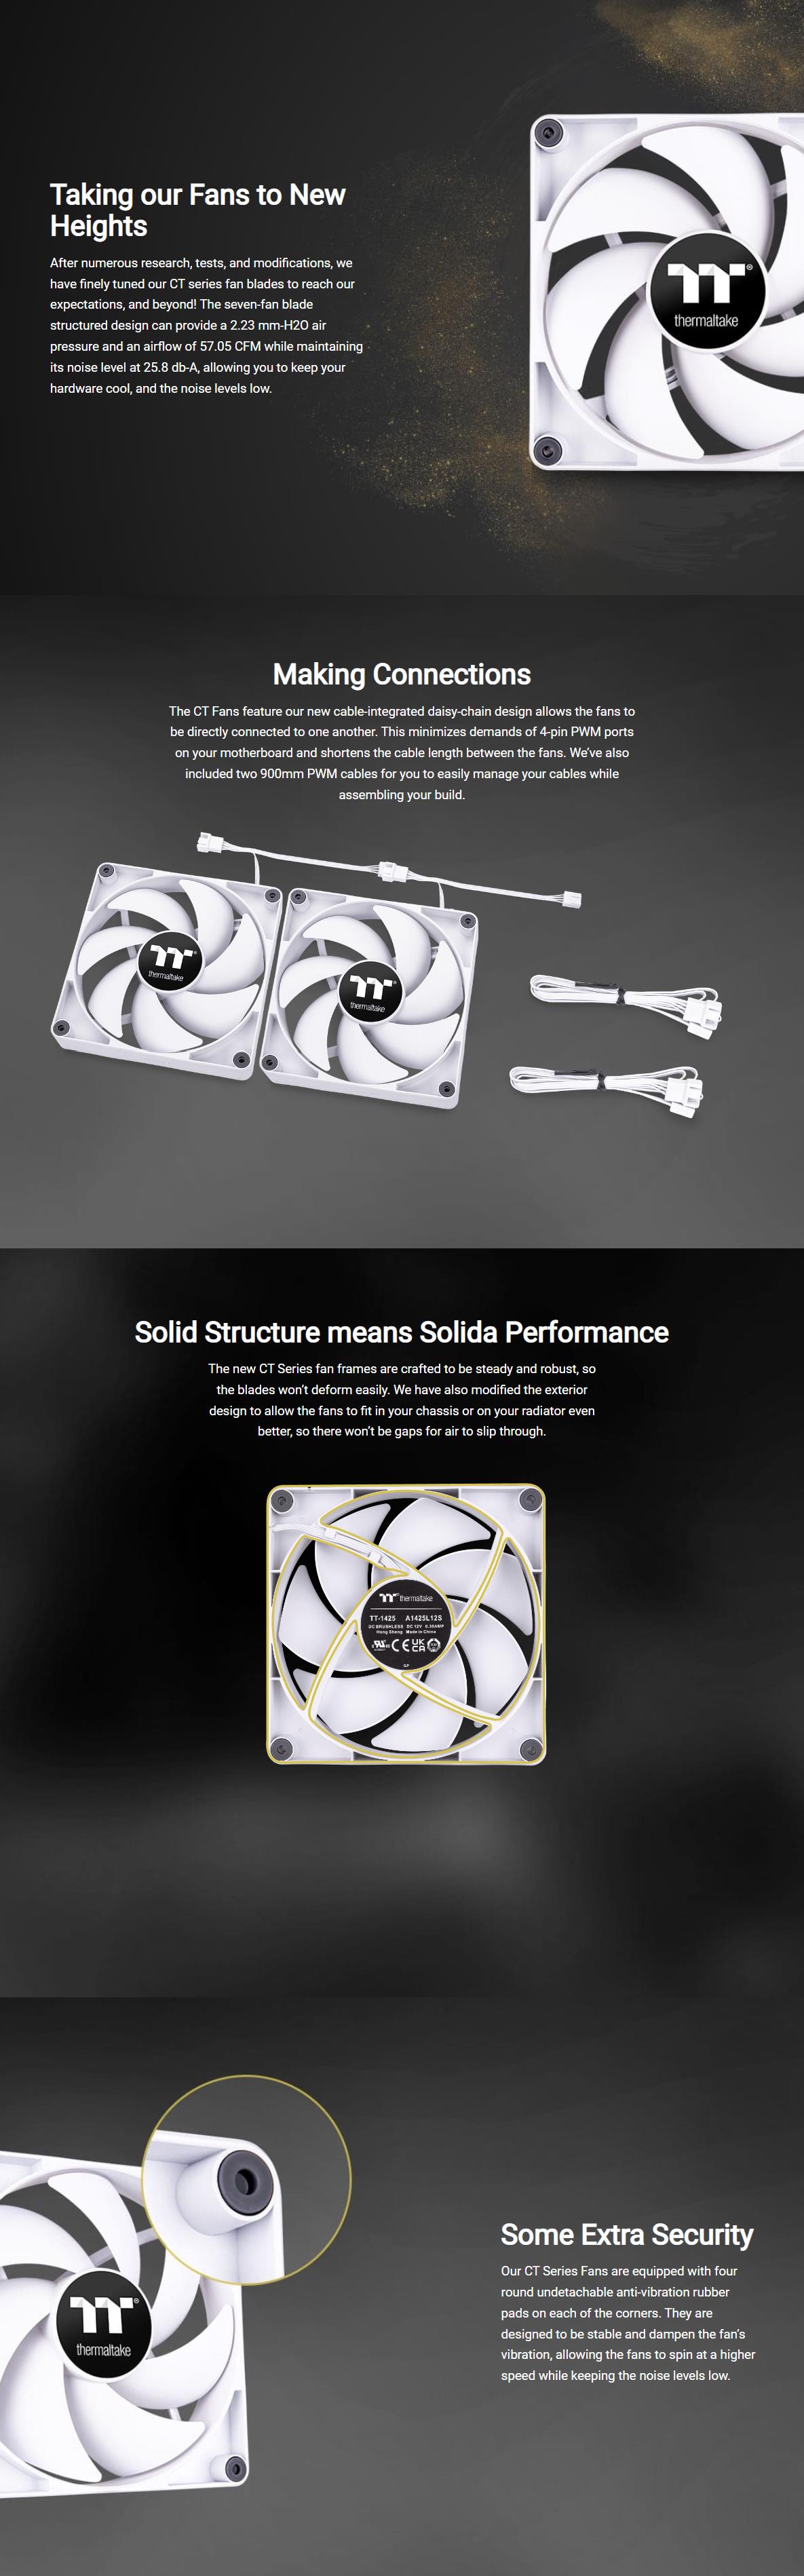 A large marketing image providing additional information about the product Thermaltake CT140 - 140mm PWM Cooling Fan (2 Pack, White) - Additional alt info not provided